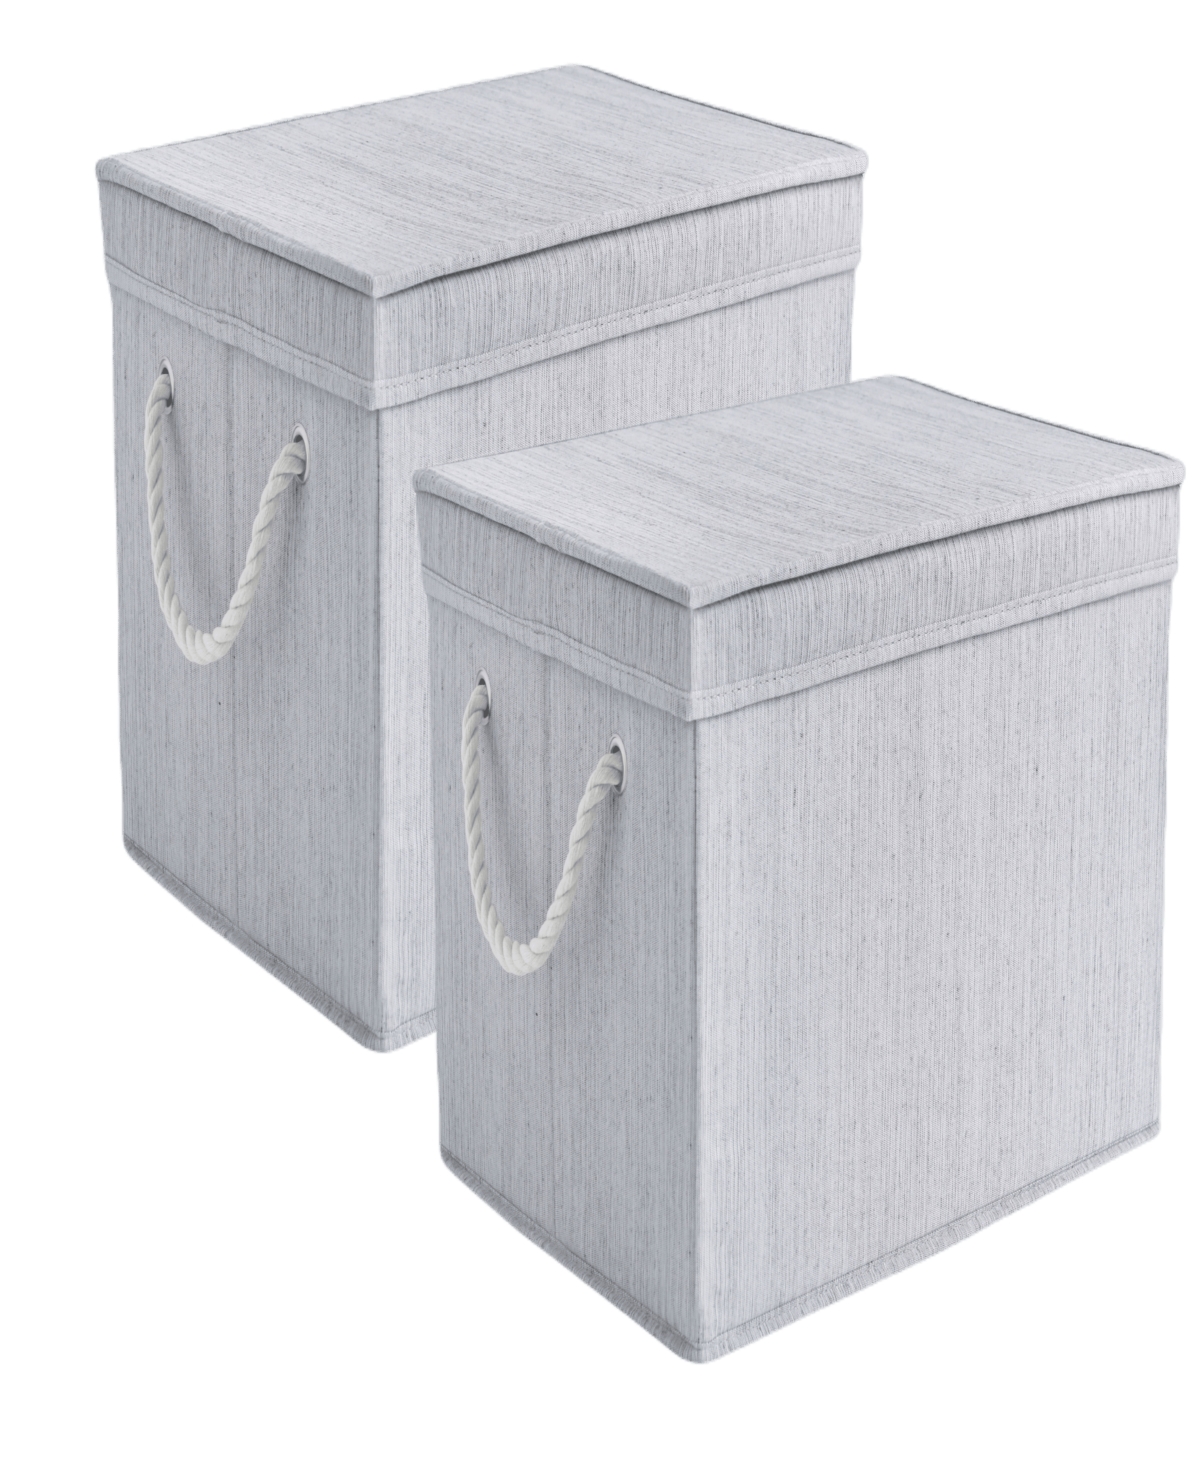 Wethinkstorage 34 Litre Collapsible Fabric Storage Bins With Lids And Cotton Rope Handles, Set Of 2 In Gray